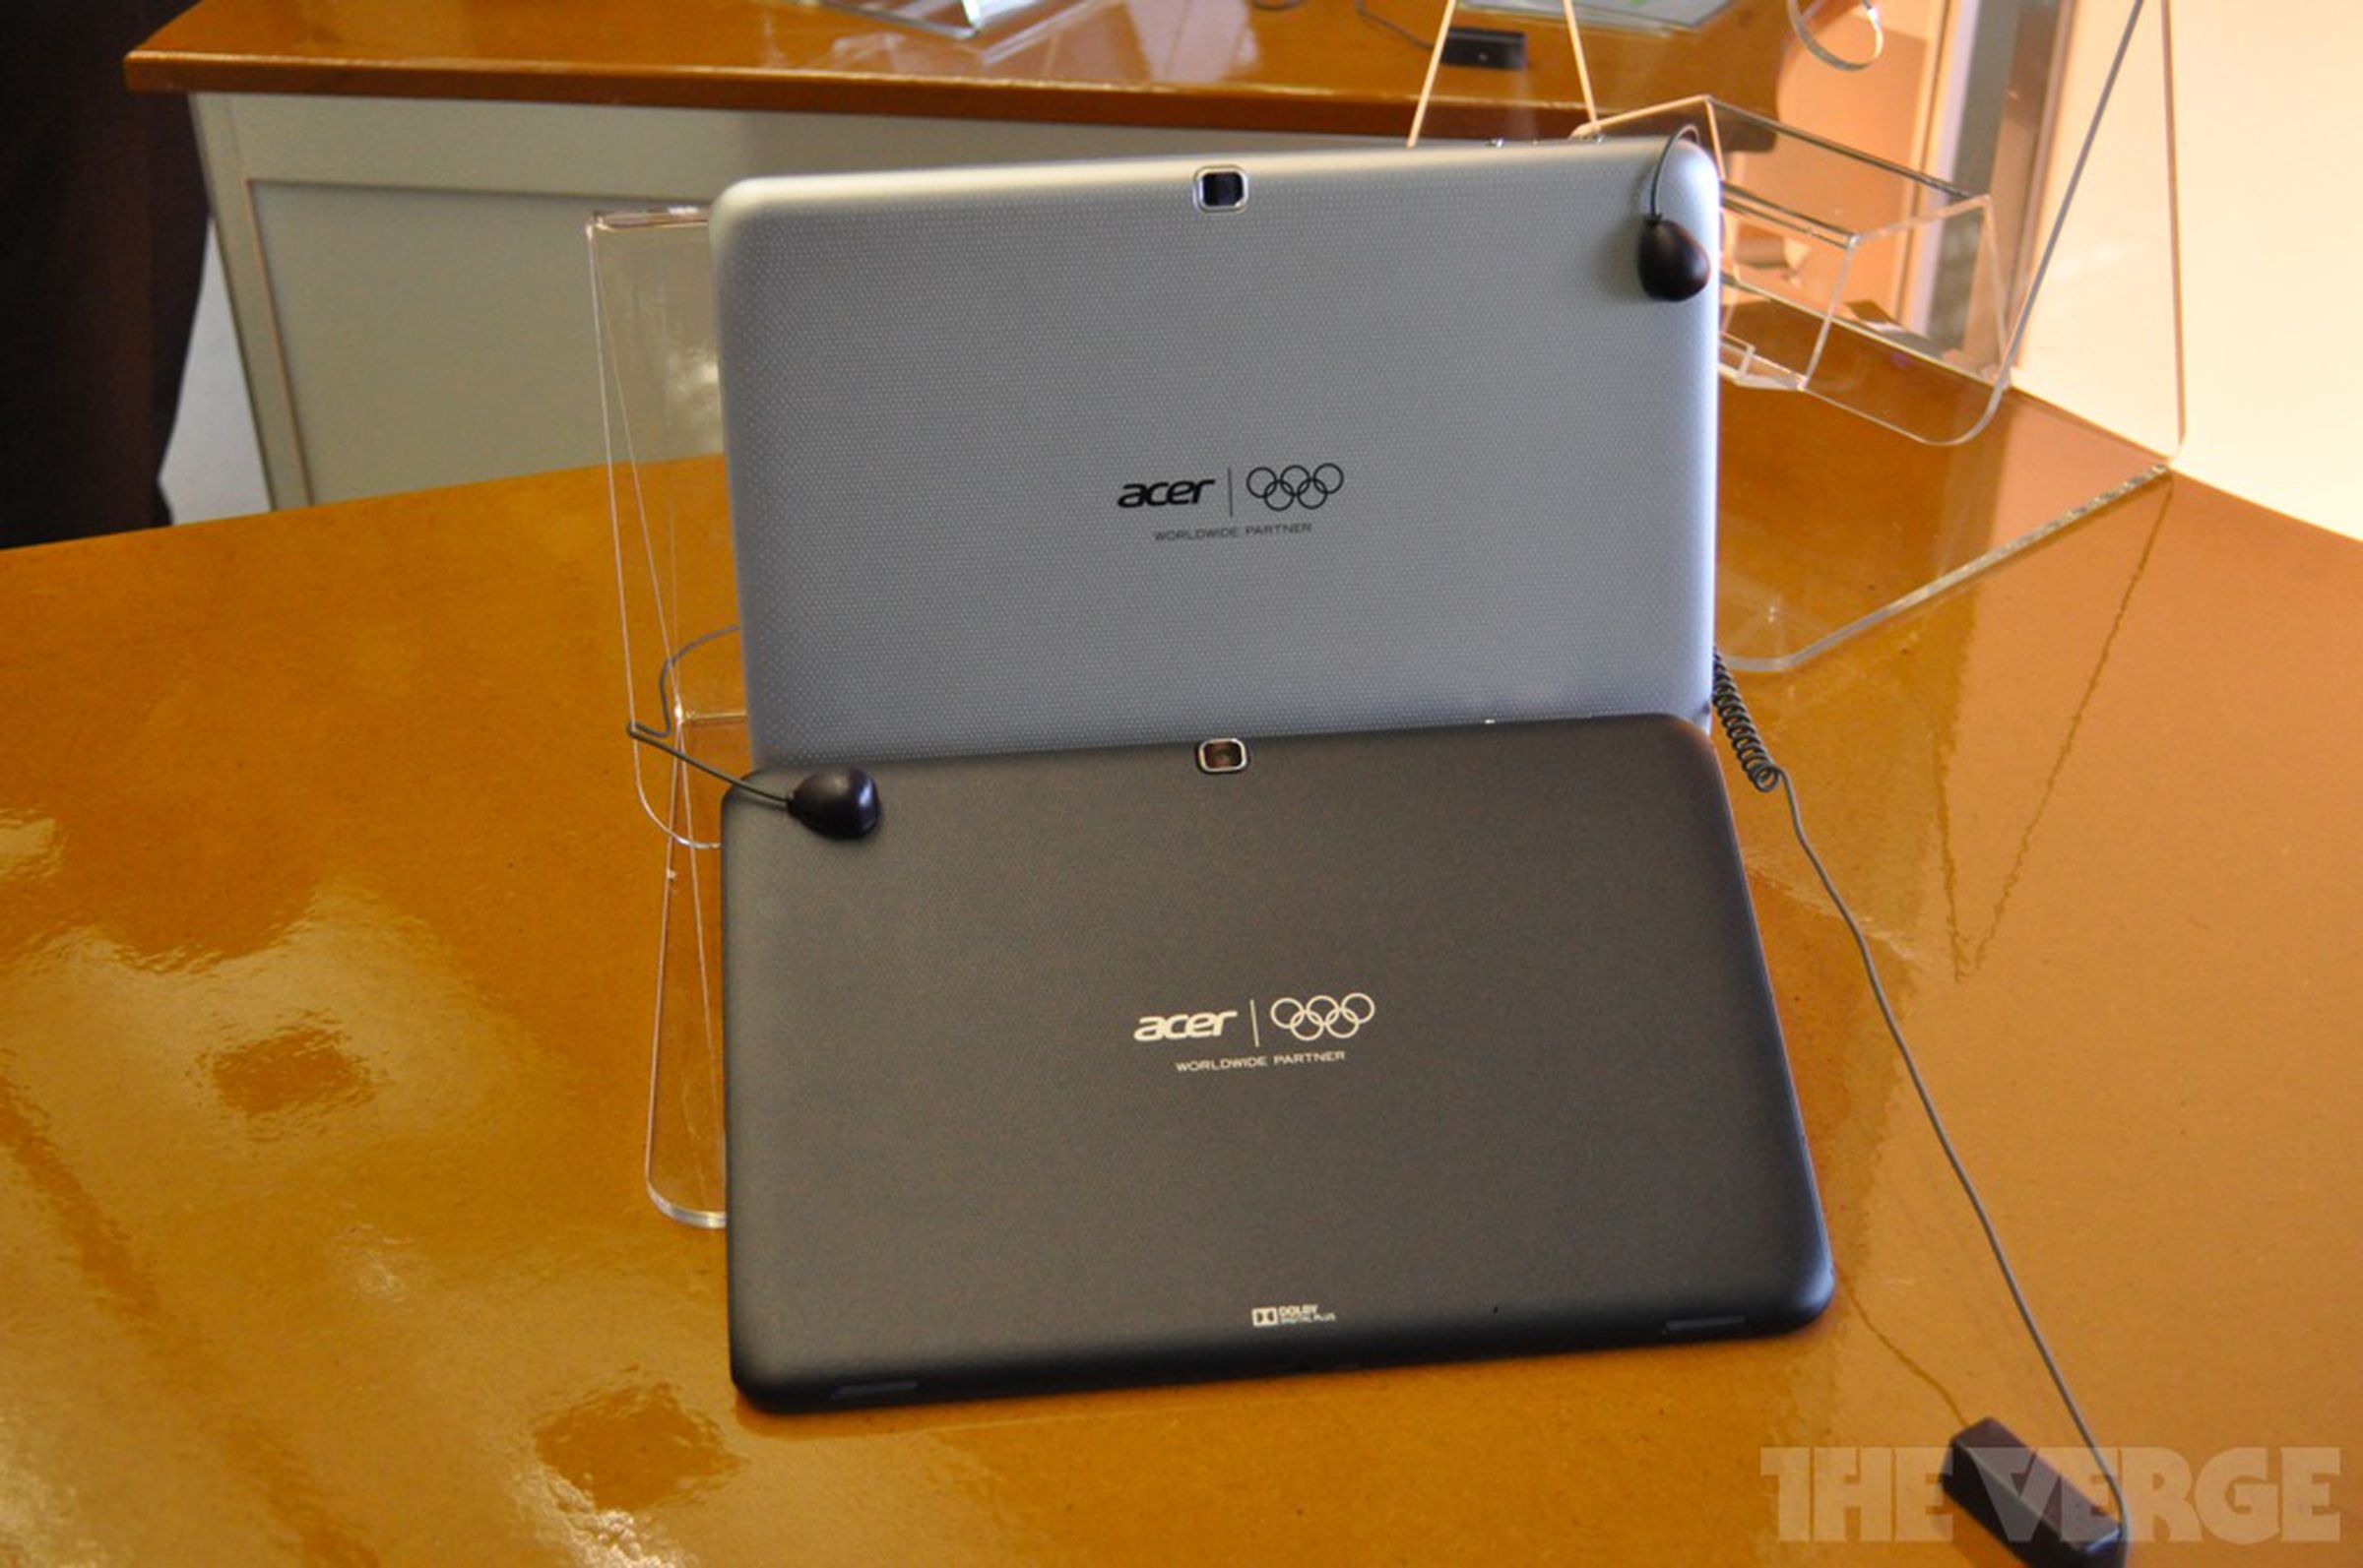 Acer Iconia Tab Olympic Games Edition hands-on photos